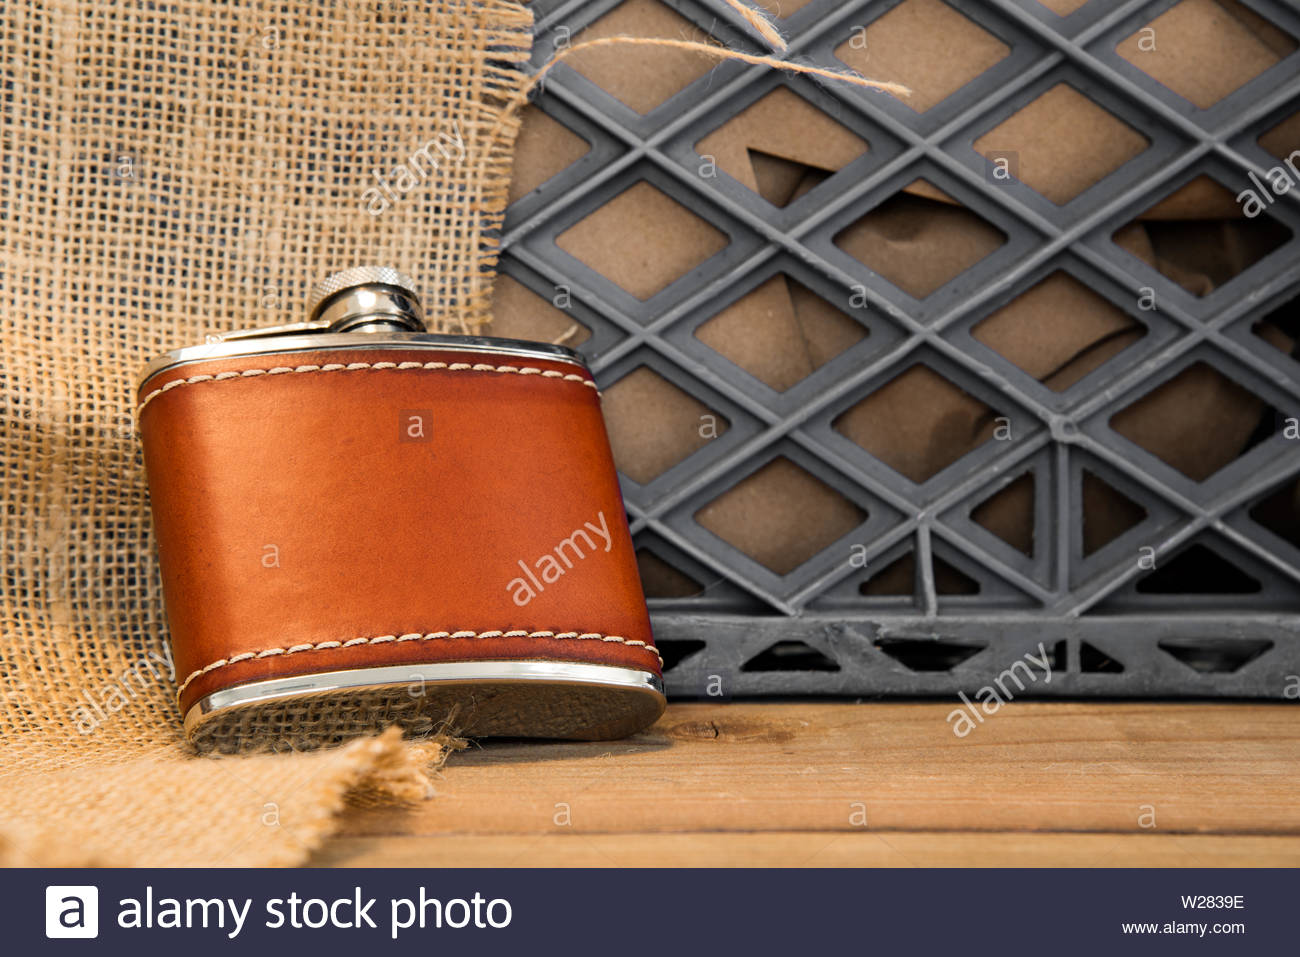 Download Leather Flask High Resolution Stock Photography And Images Alamy Yellowimages Mockups